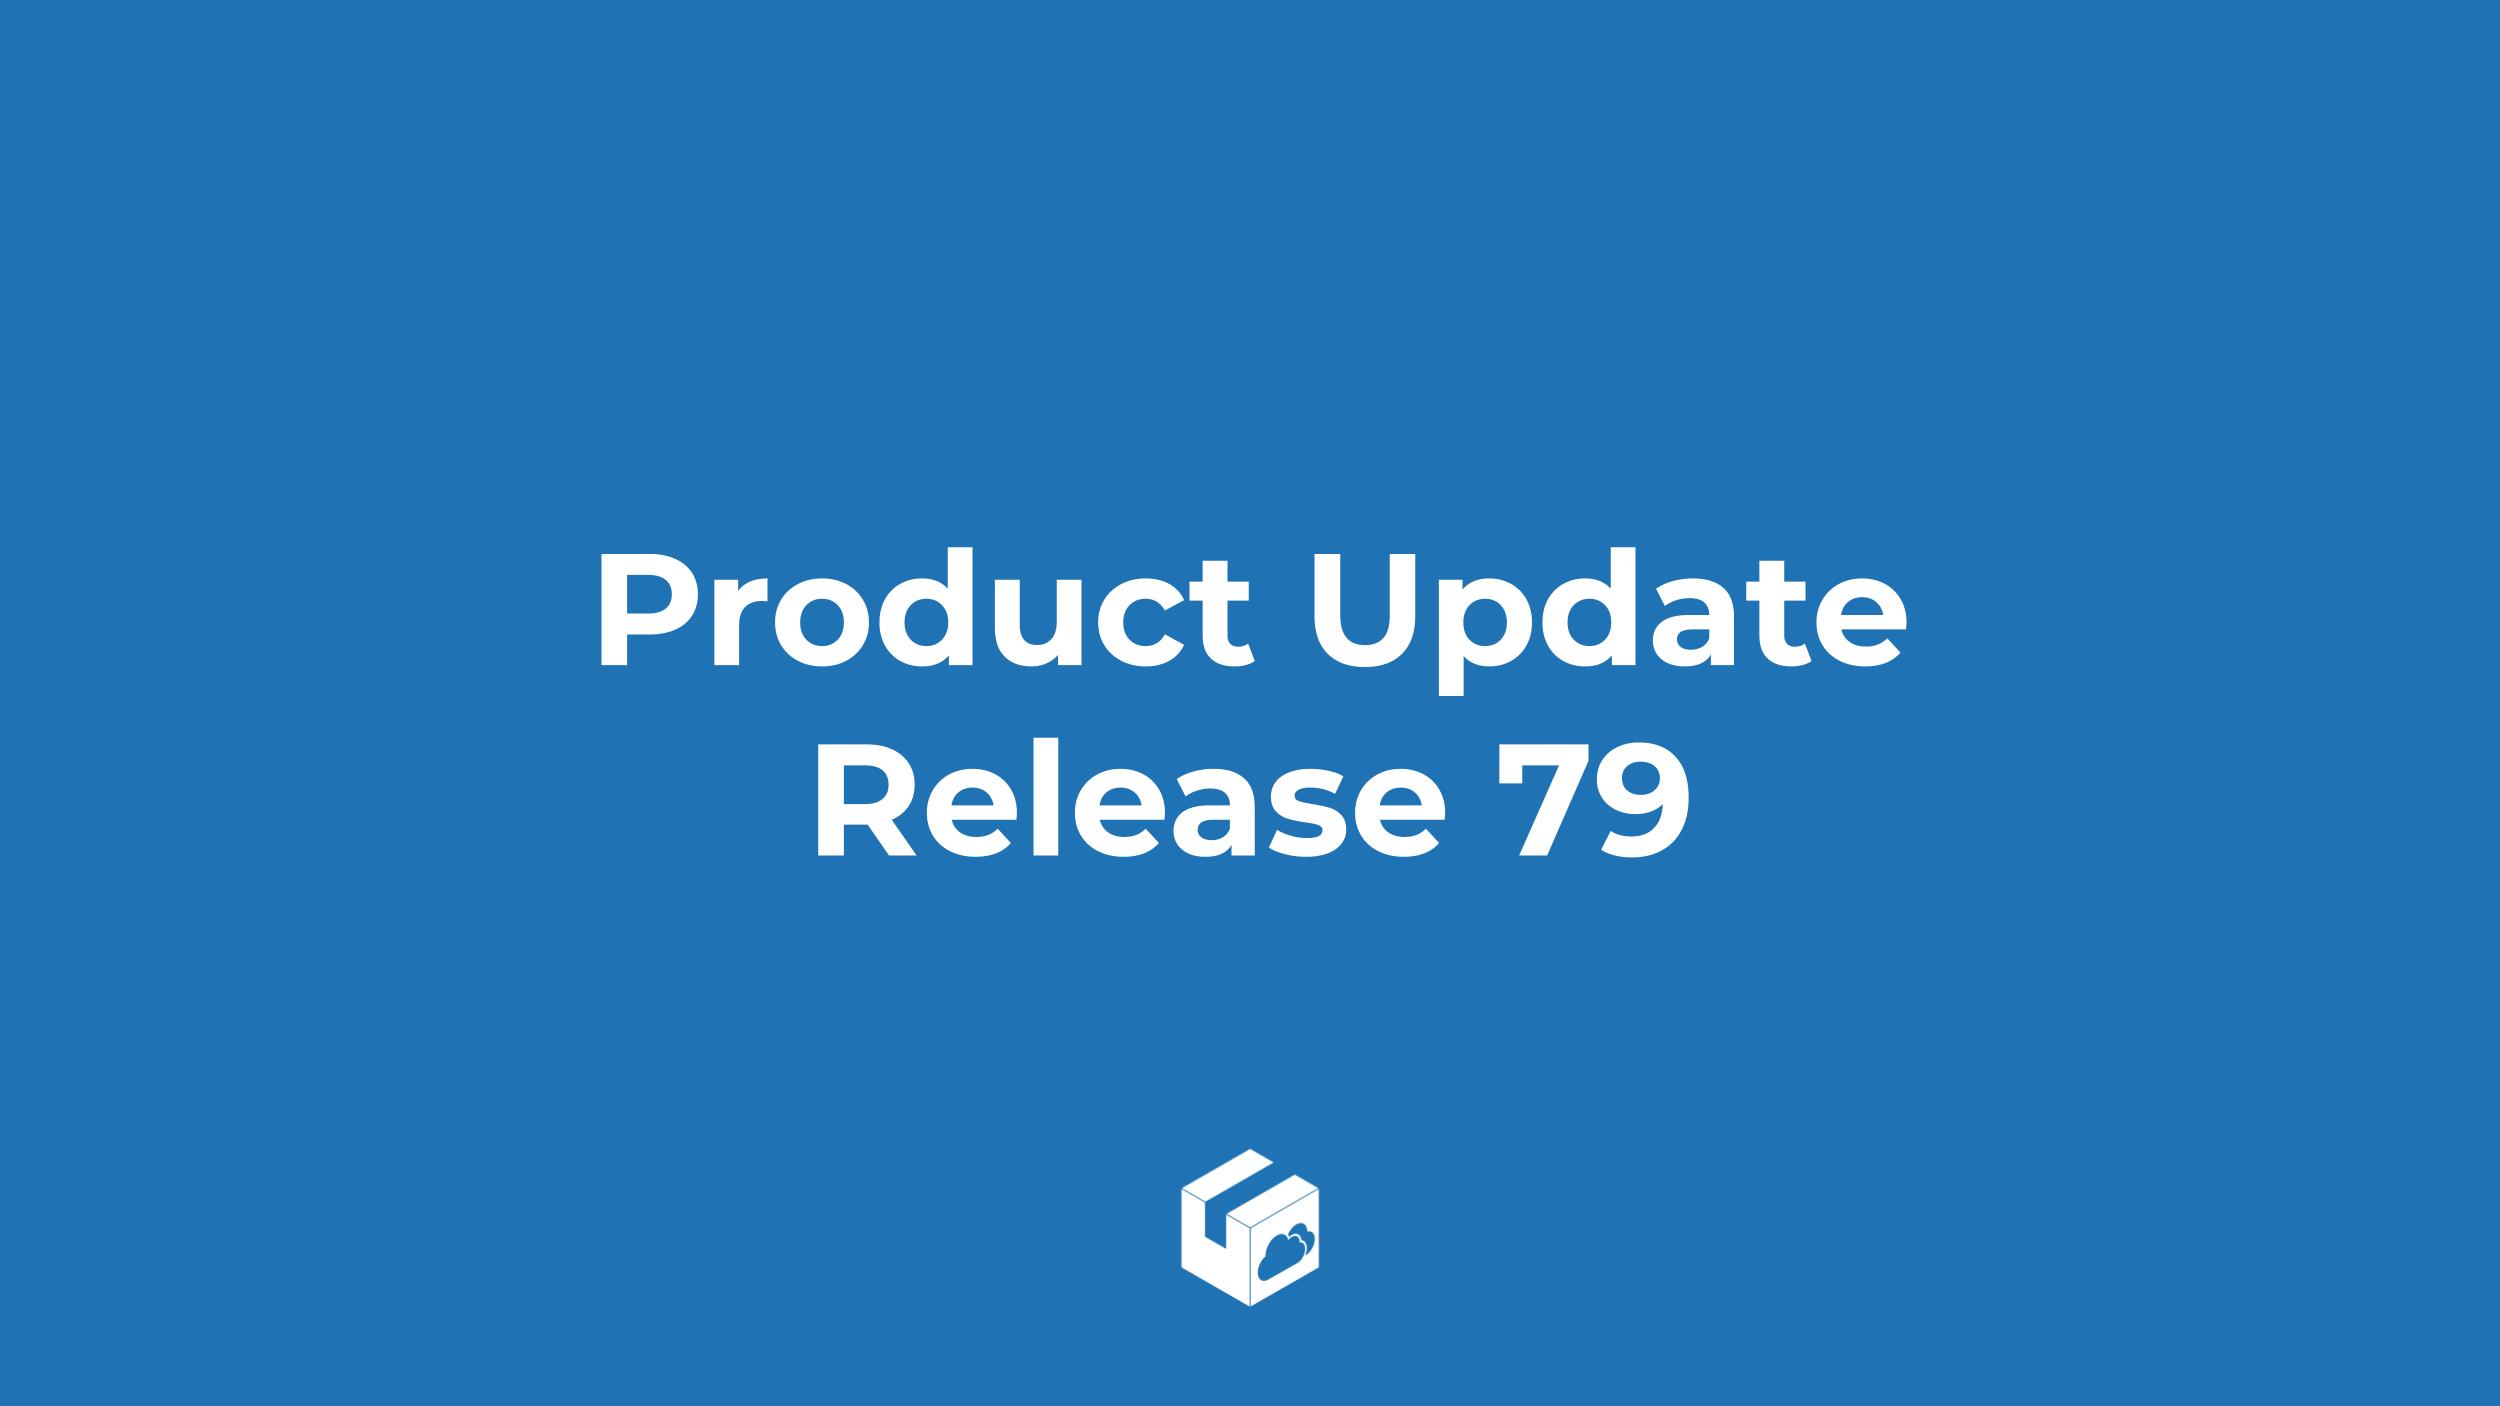 Release 79